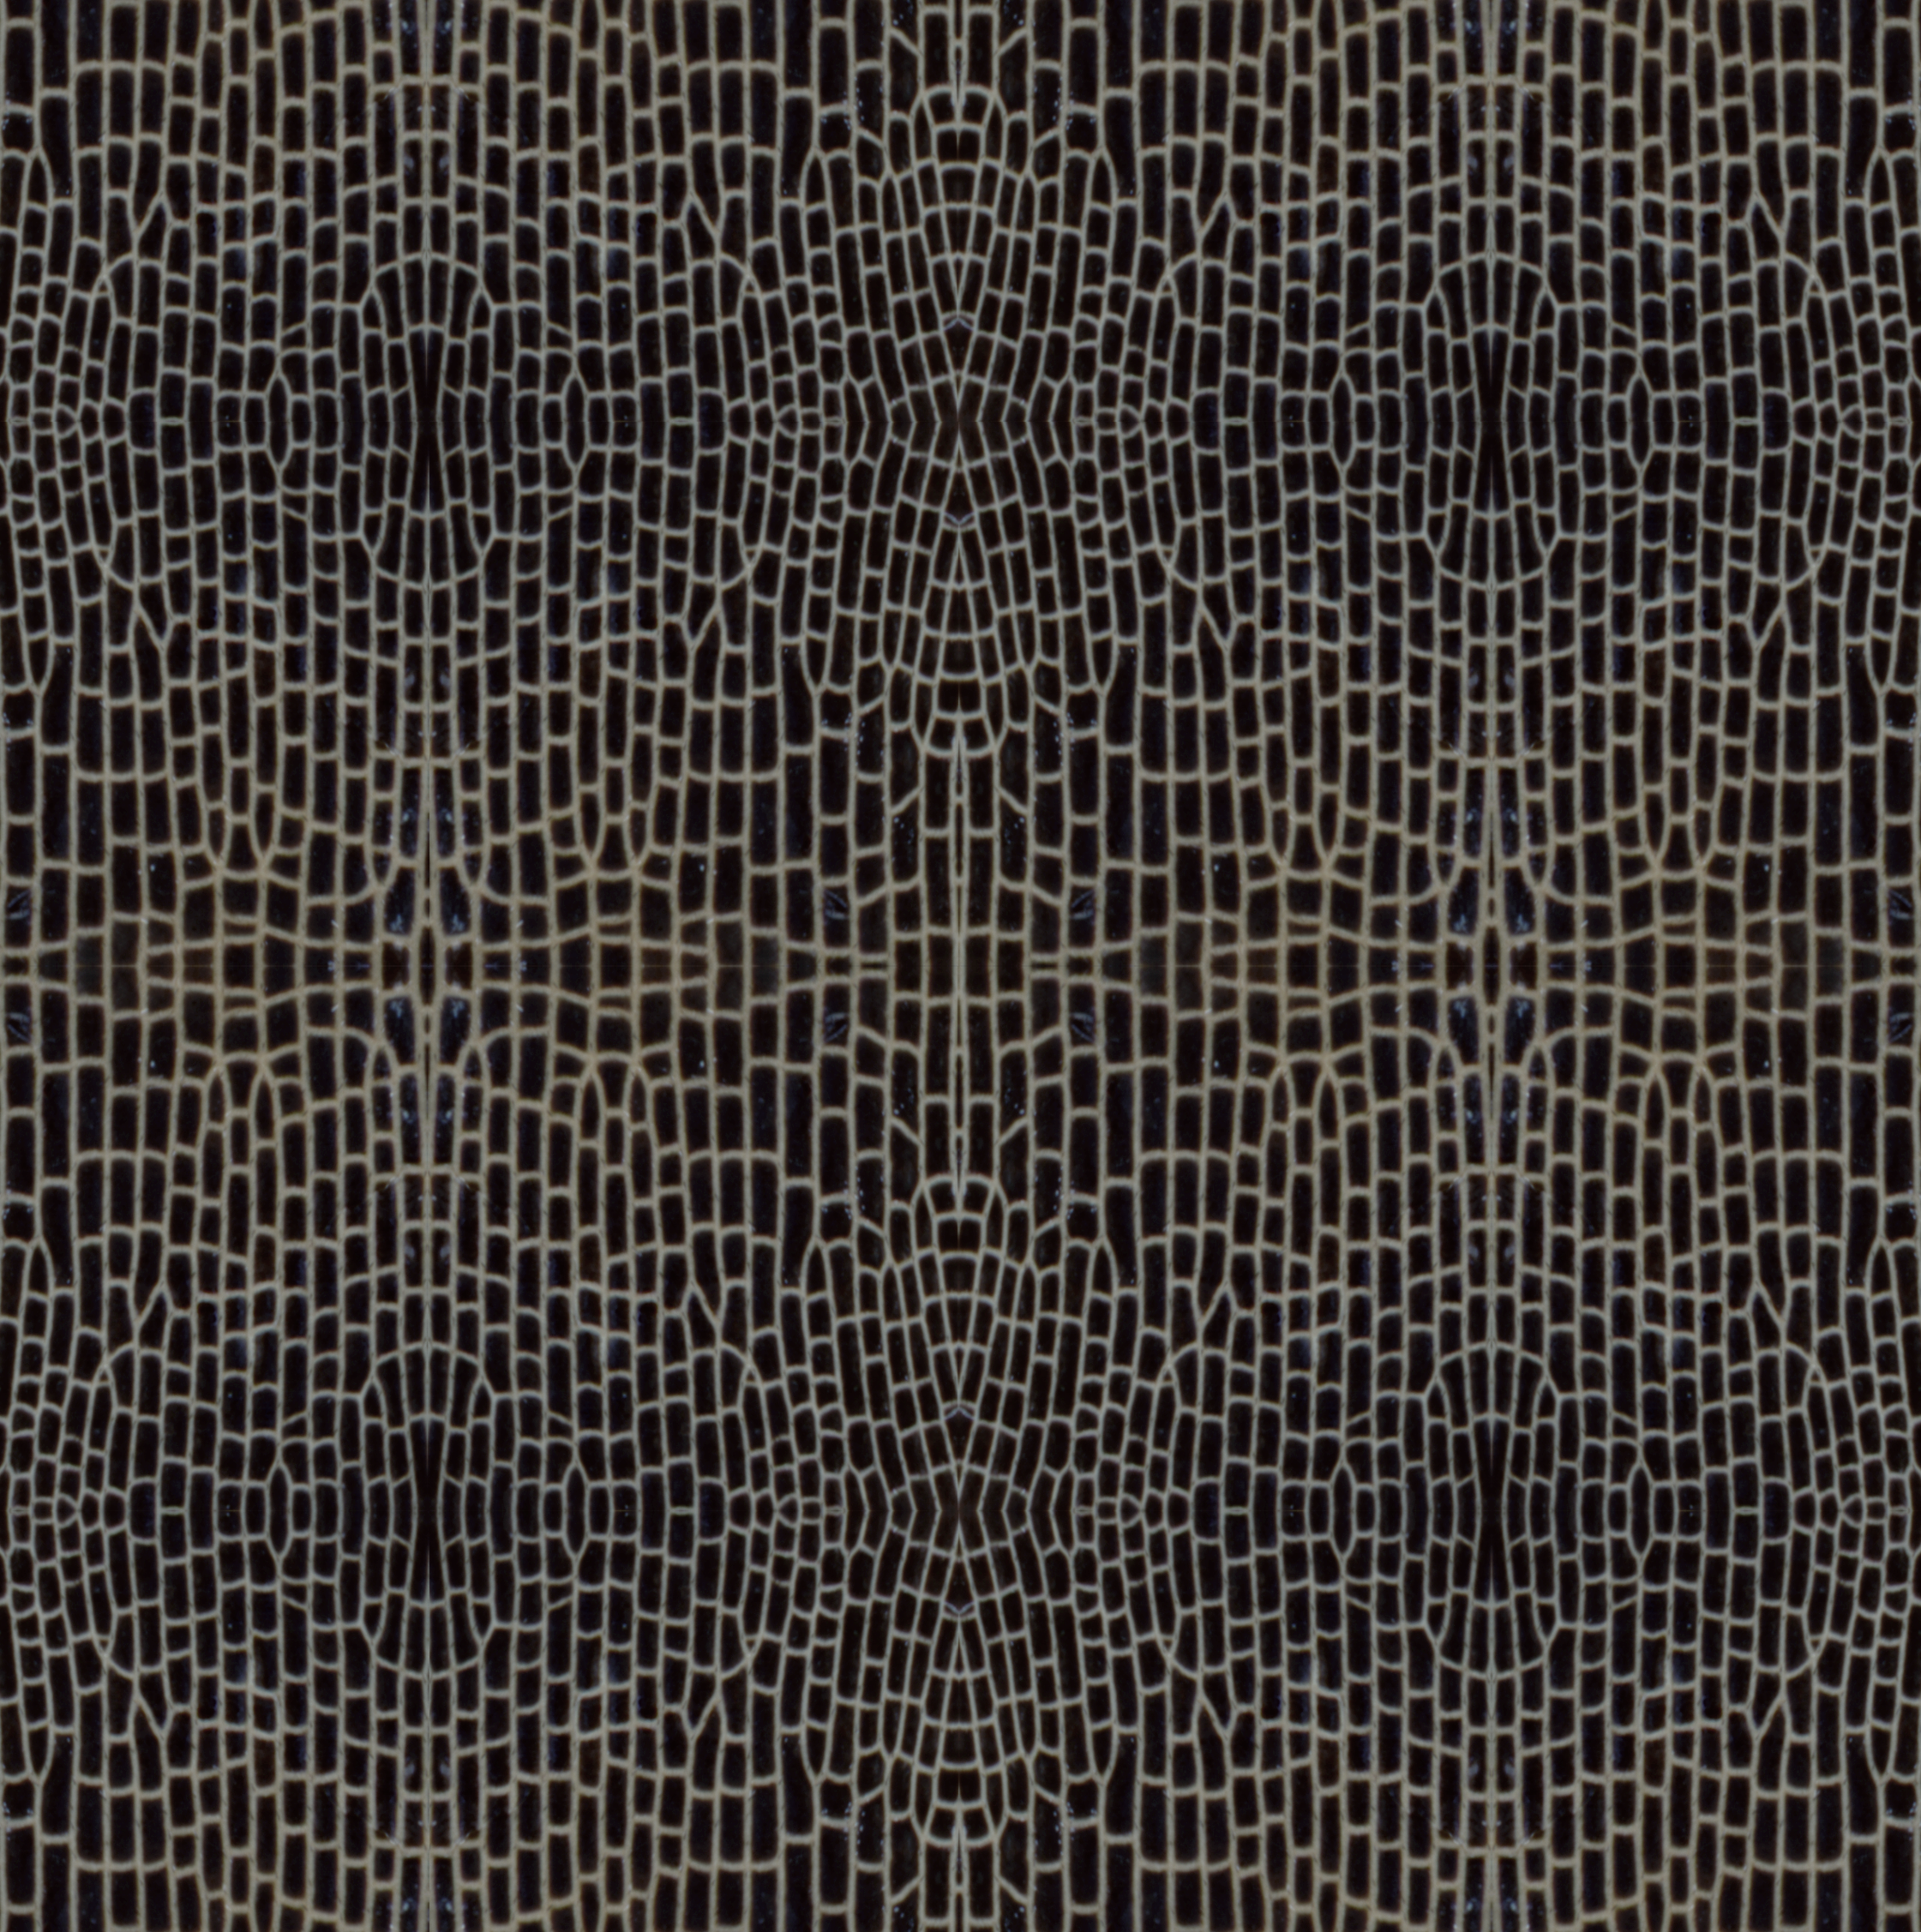 Repeated pattern taken from a spotted lanternfly wing